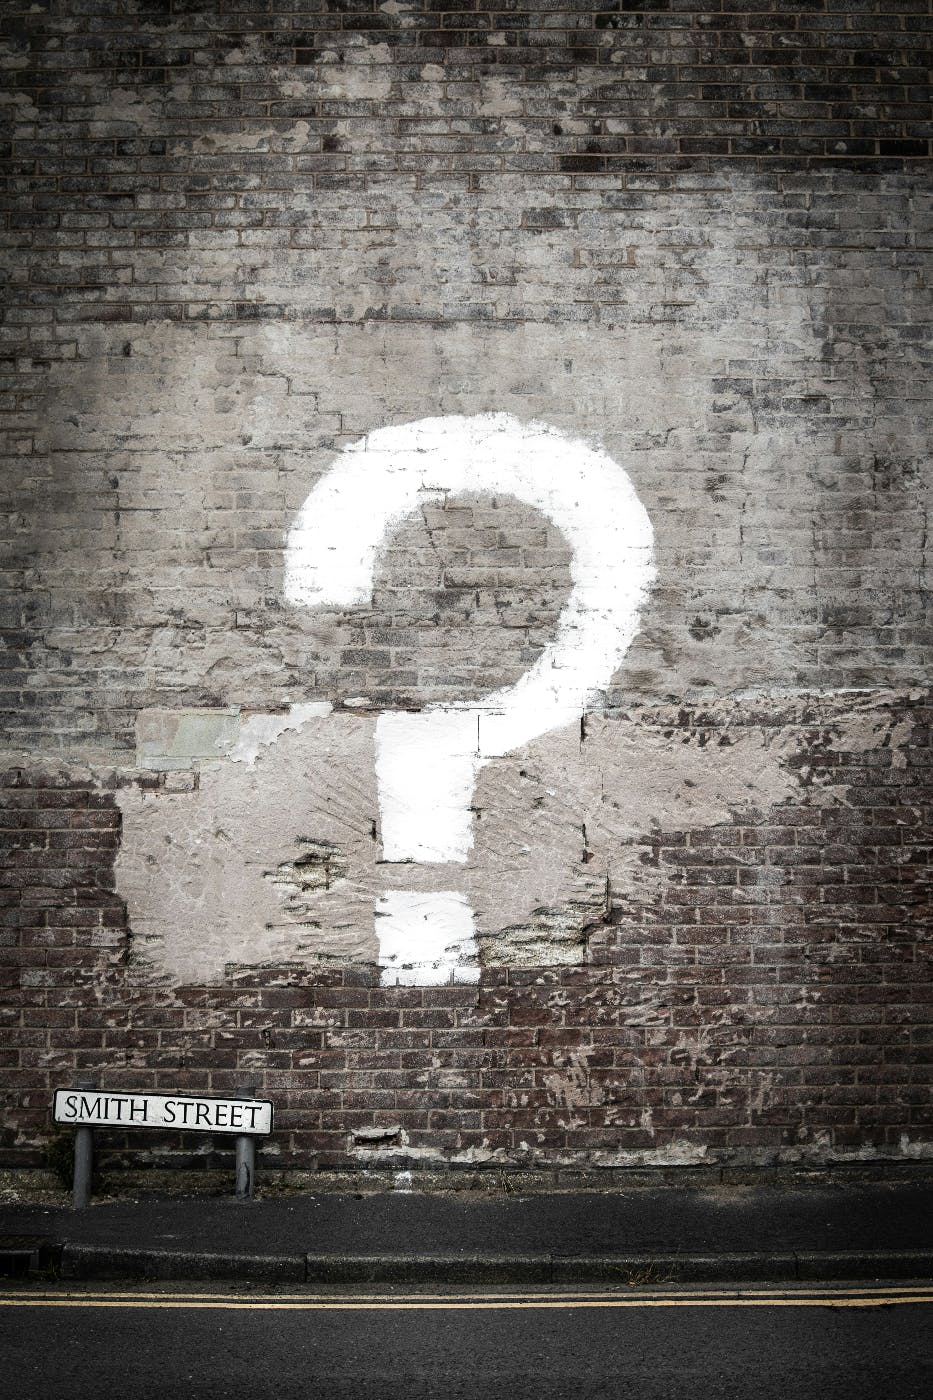 A plastered brick wall with a street sign in the lower left corner reading Smith Street and a large question mark painted on the wall